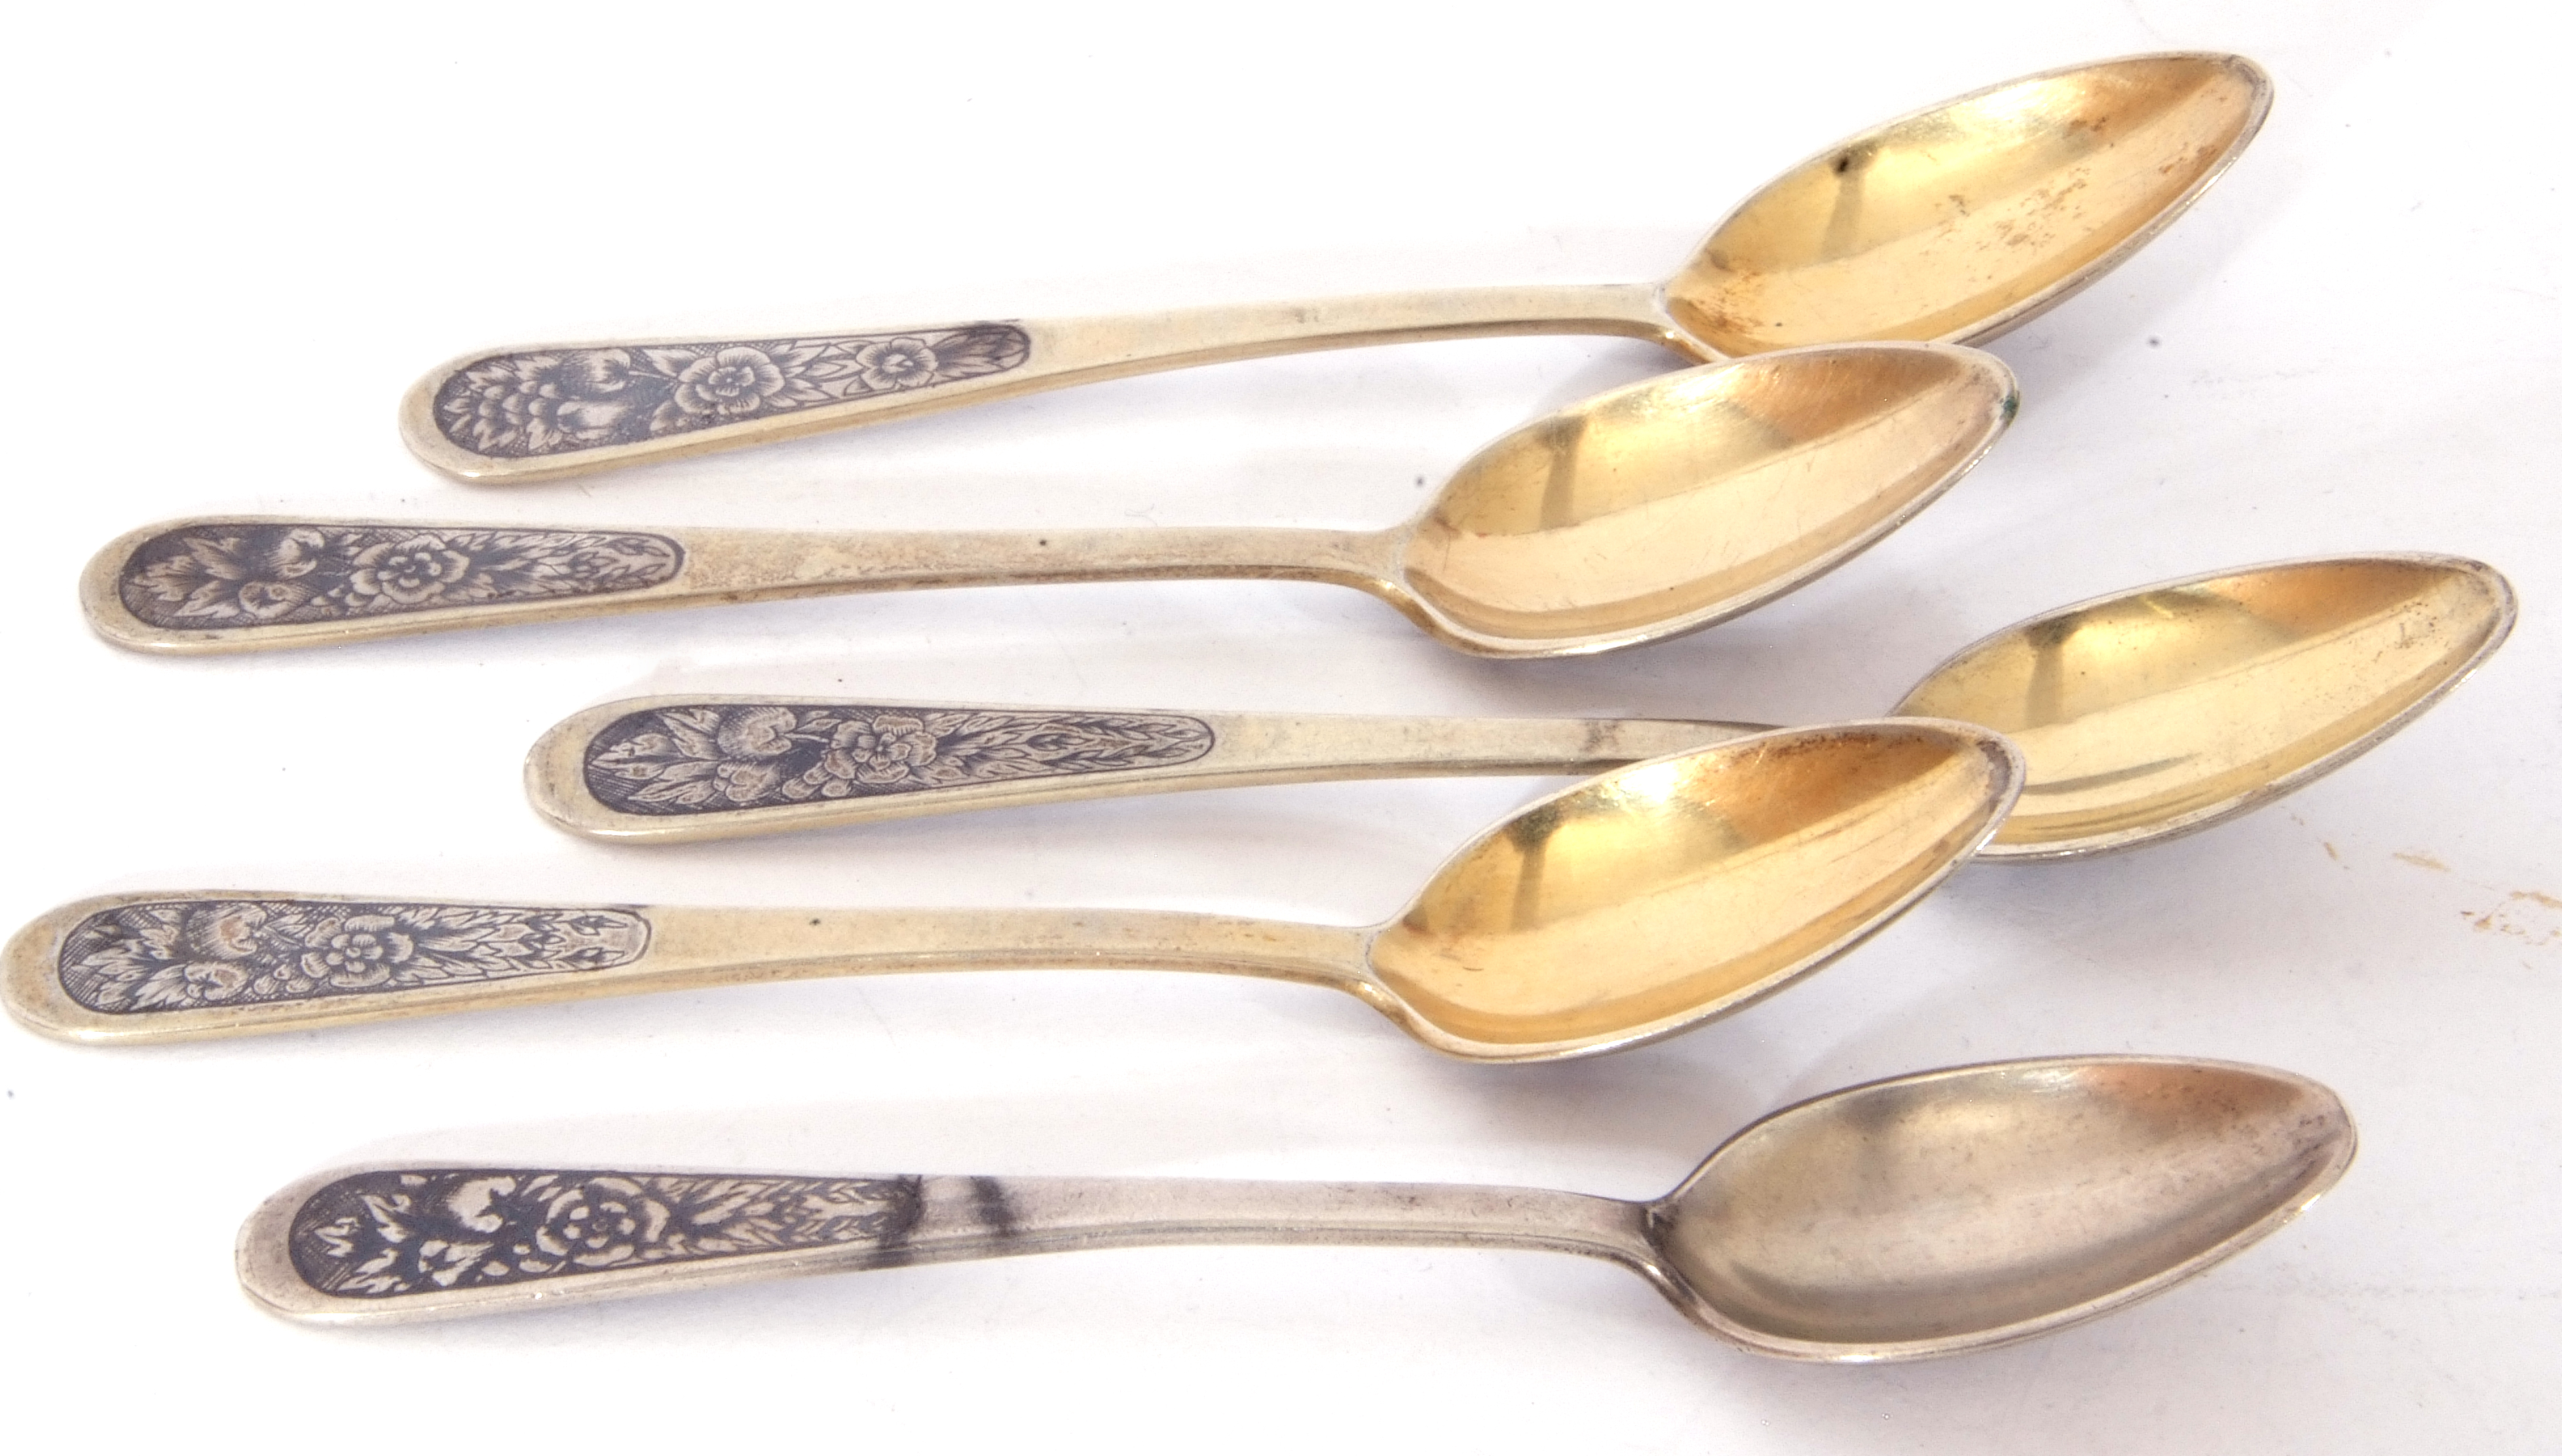 Set of five white metal and niello decorated tea spoons, possibly Russian, no makers marks apparent - Image 3 of 4